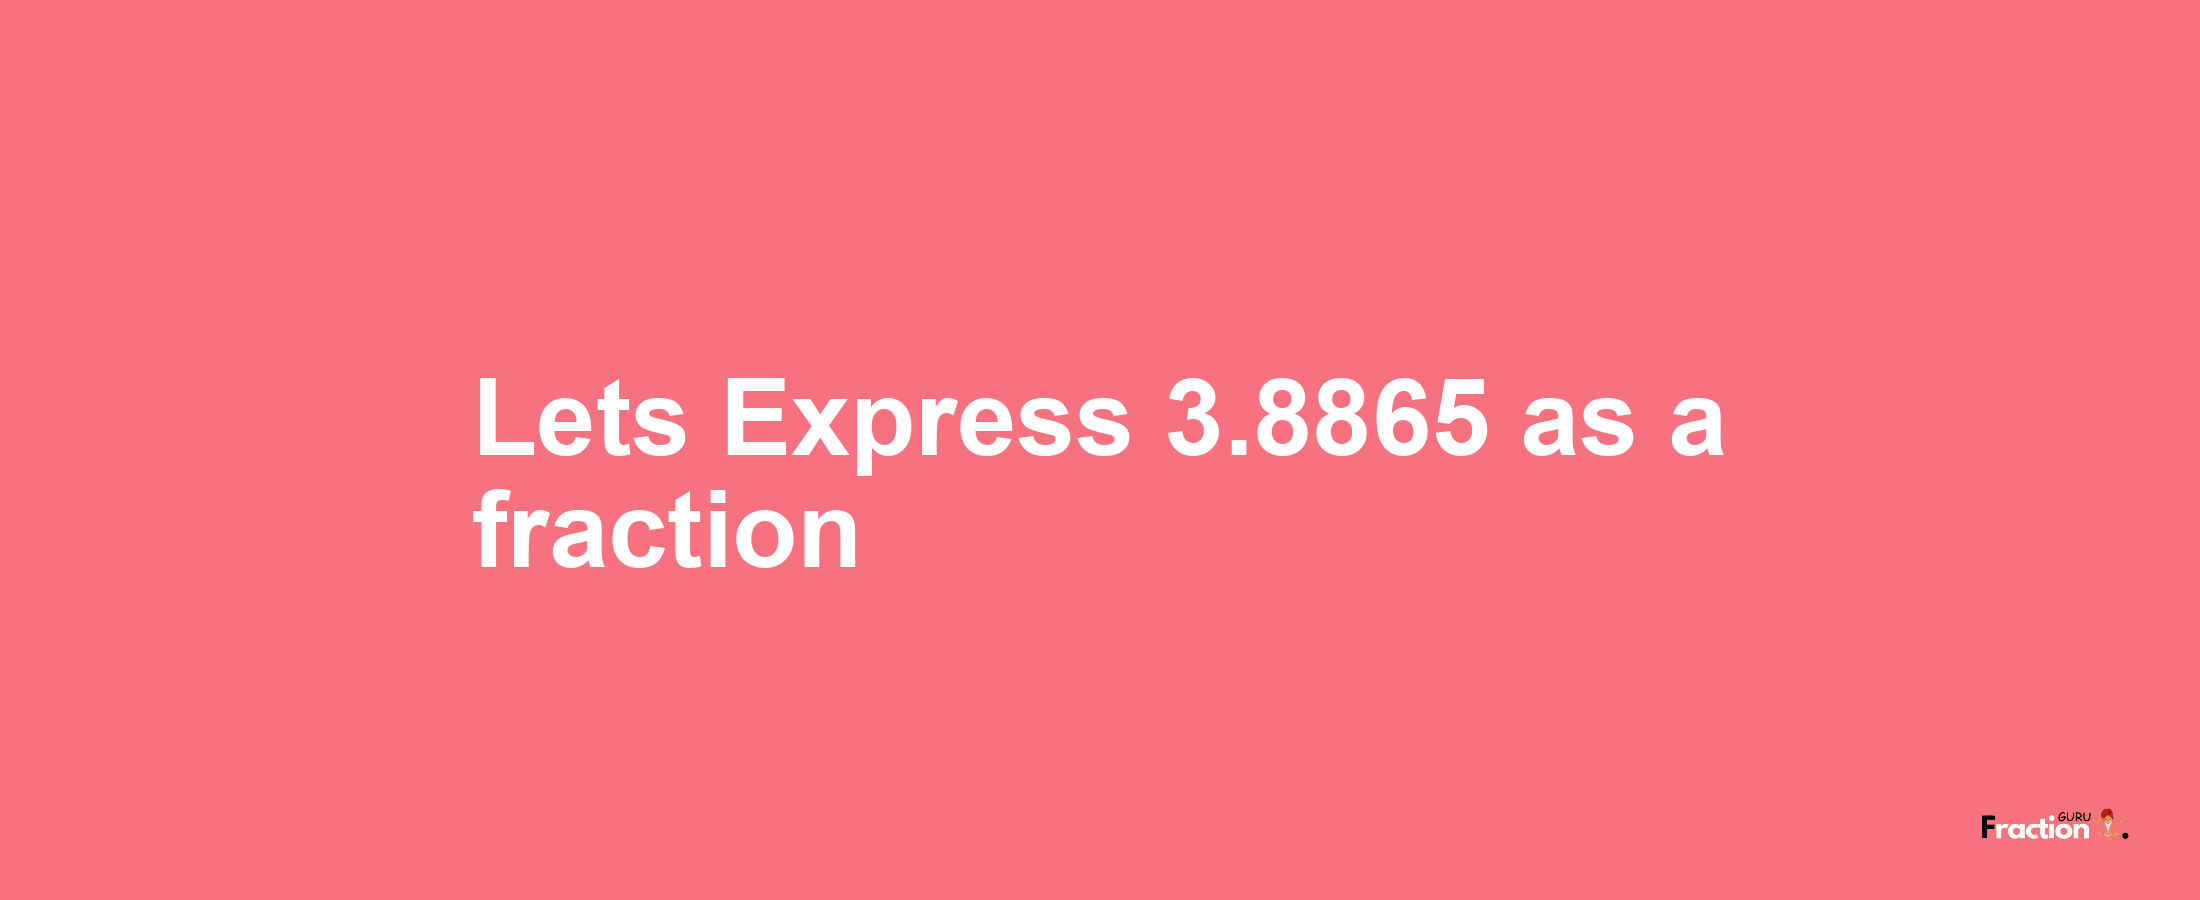 Lets Express 3.8865 as afraction